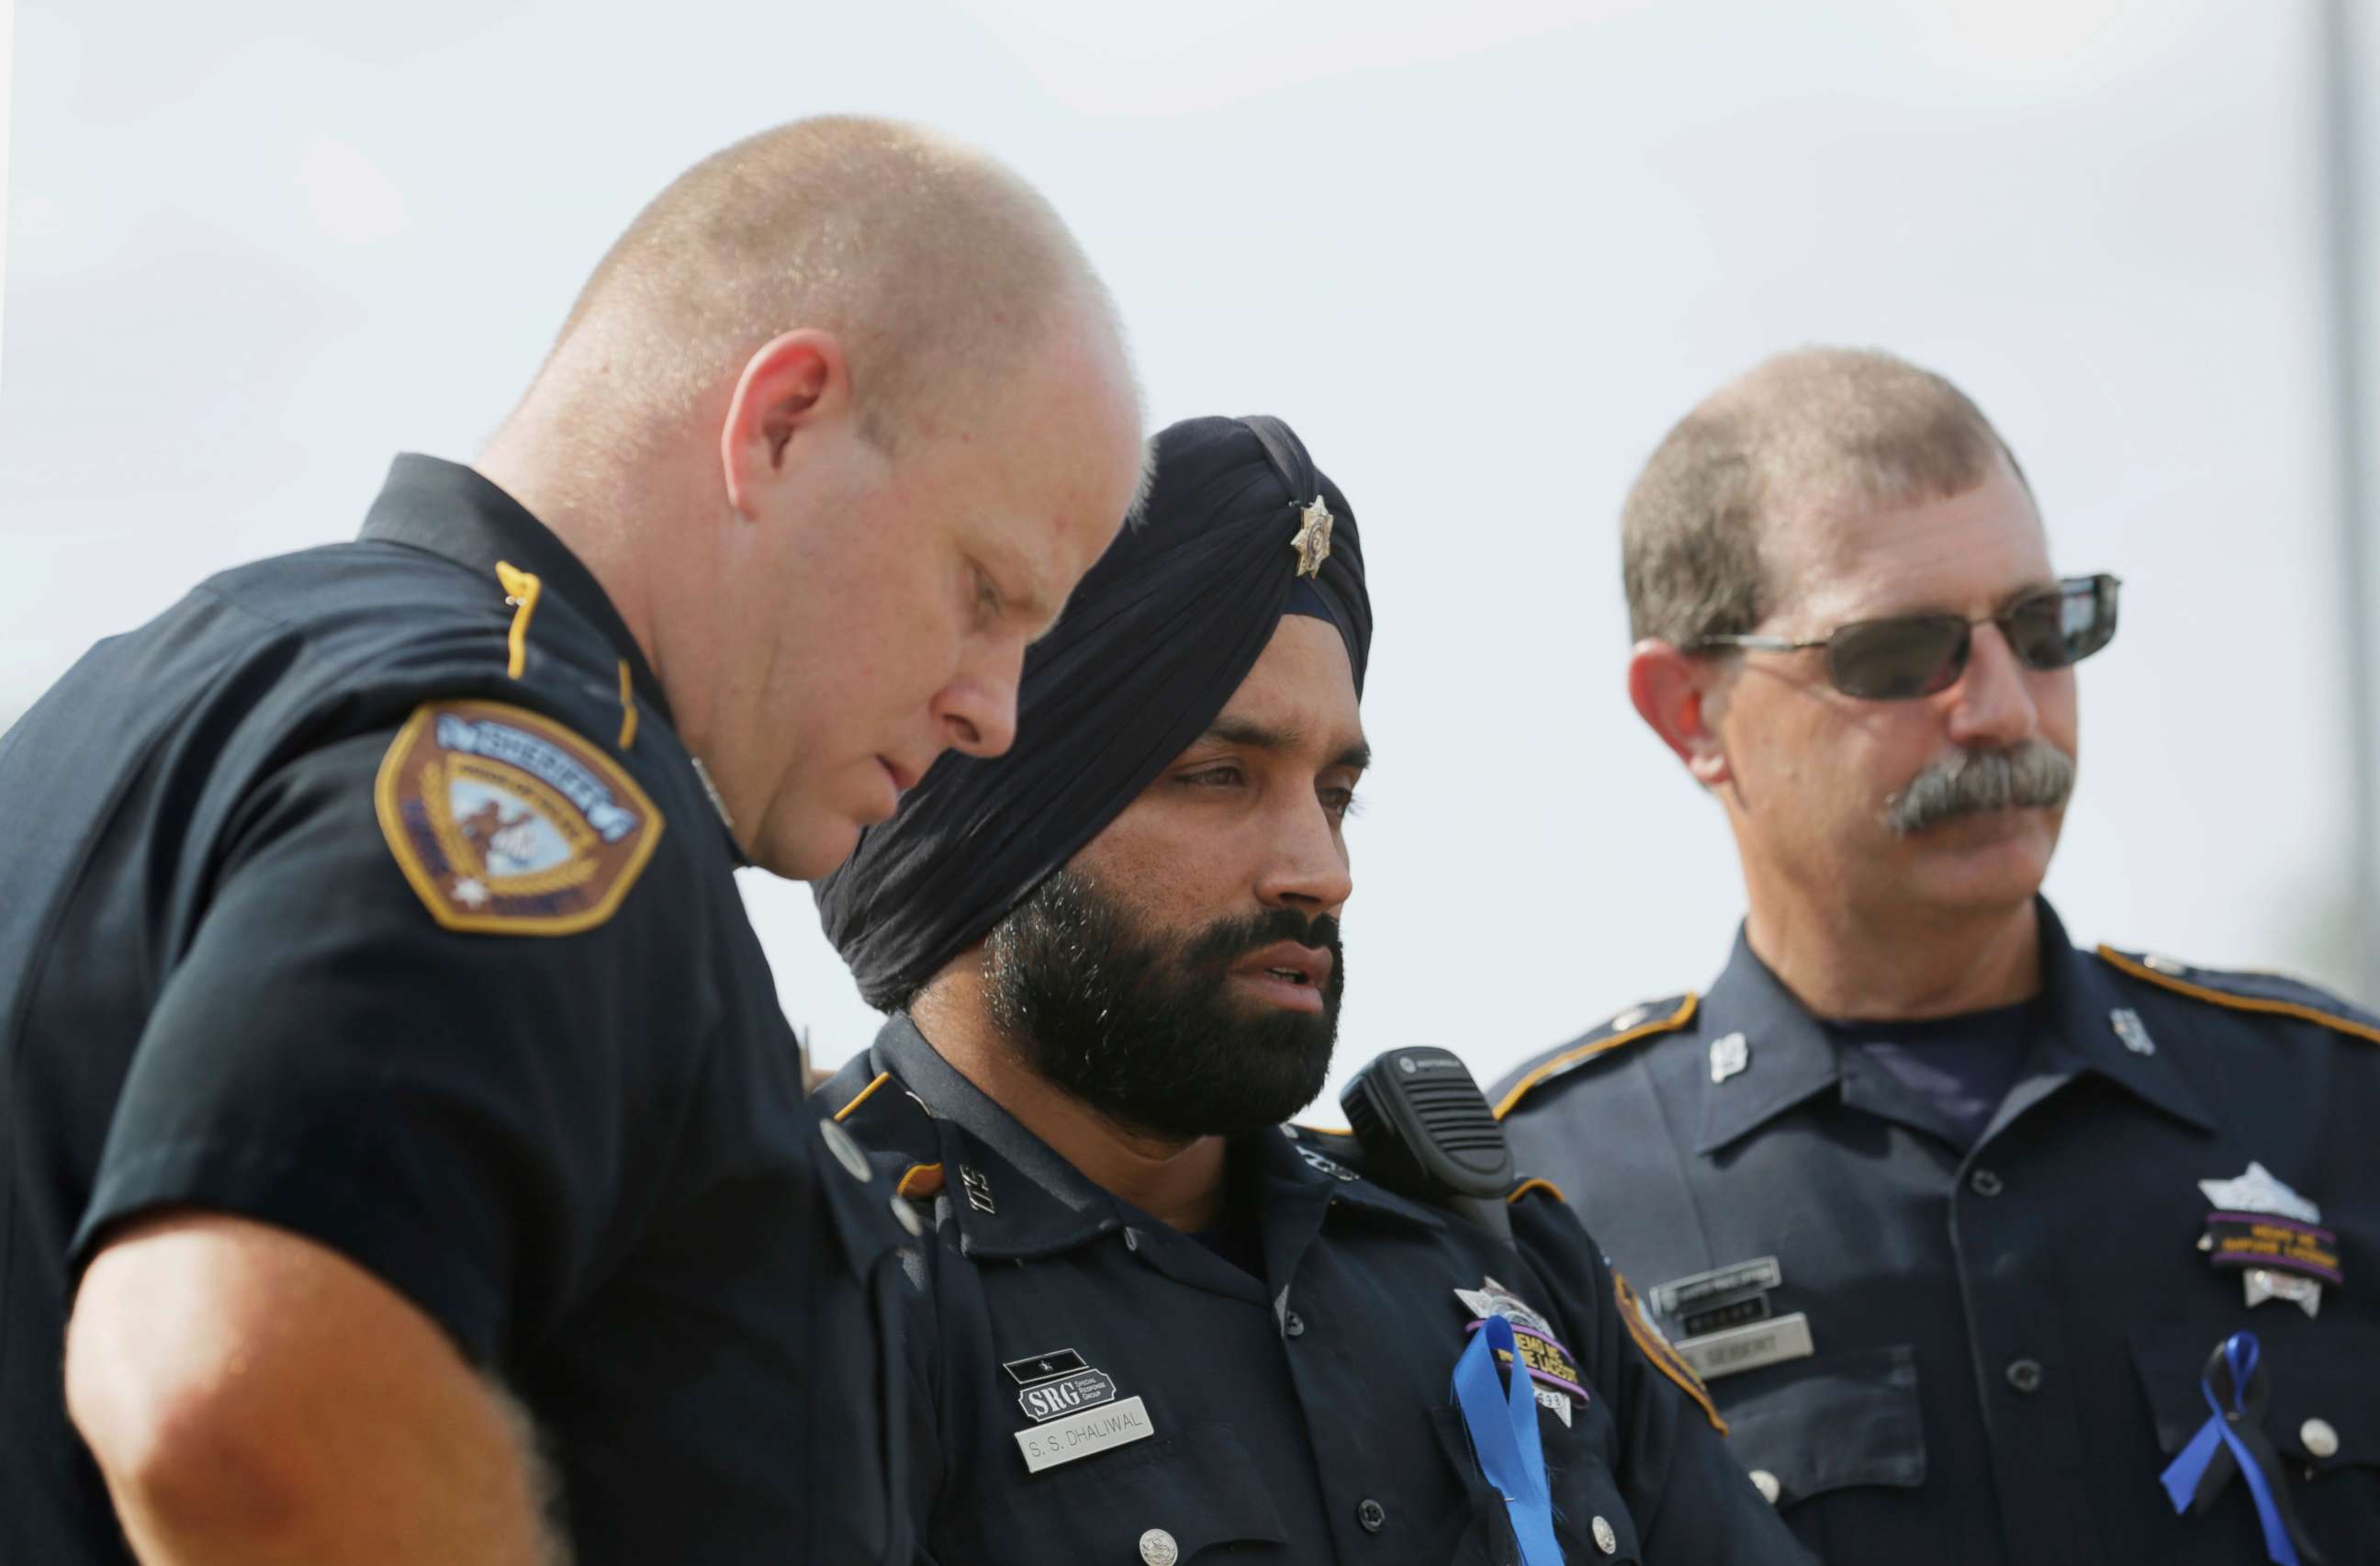 PHOTO: In this Aug. 30, 2015, photo, Harris County Sheriff's Deputy Sandeep Dhaliwal, center, grieves with Deputies Dixon, left, and Seibert, right, at a memorial for Deputy Darren Goforth, at the Chevron where he was killed, in Houston.